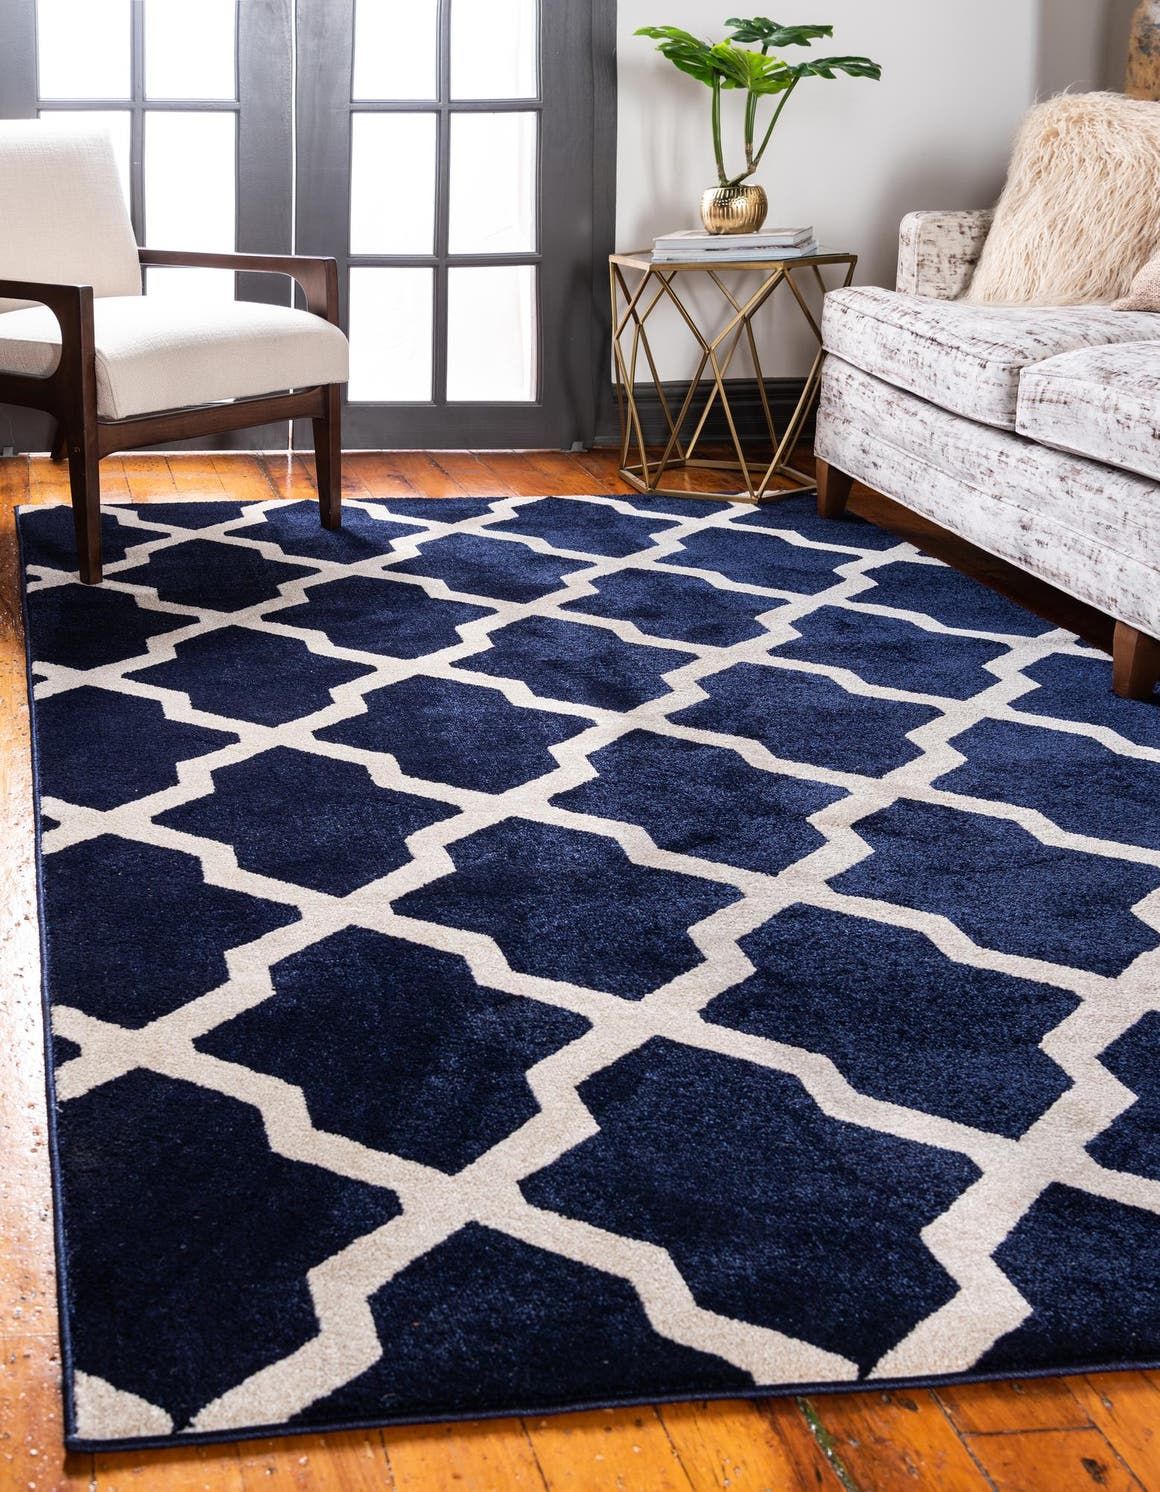 Unique Loom San Antonio Trellis Rug Navy Blue/Beige 3' 3" X 5' 3" Rectangle  Geometric Contemporary Perfect For Living Room Bed Room Dining Room Office  – Walmart For Navy Blue Rugs (View 5 of 15)